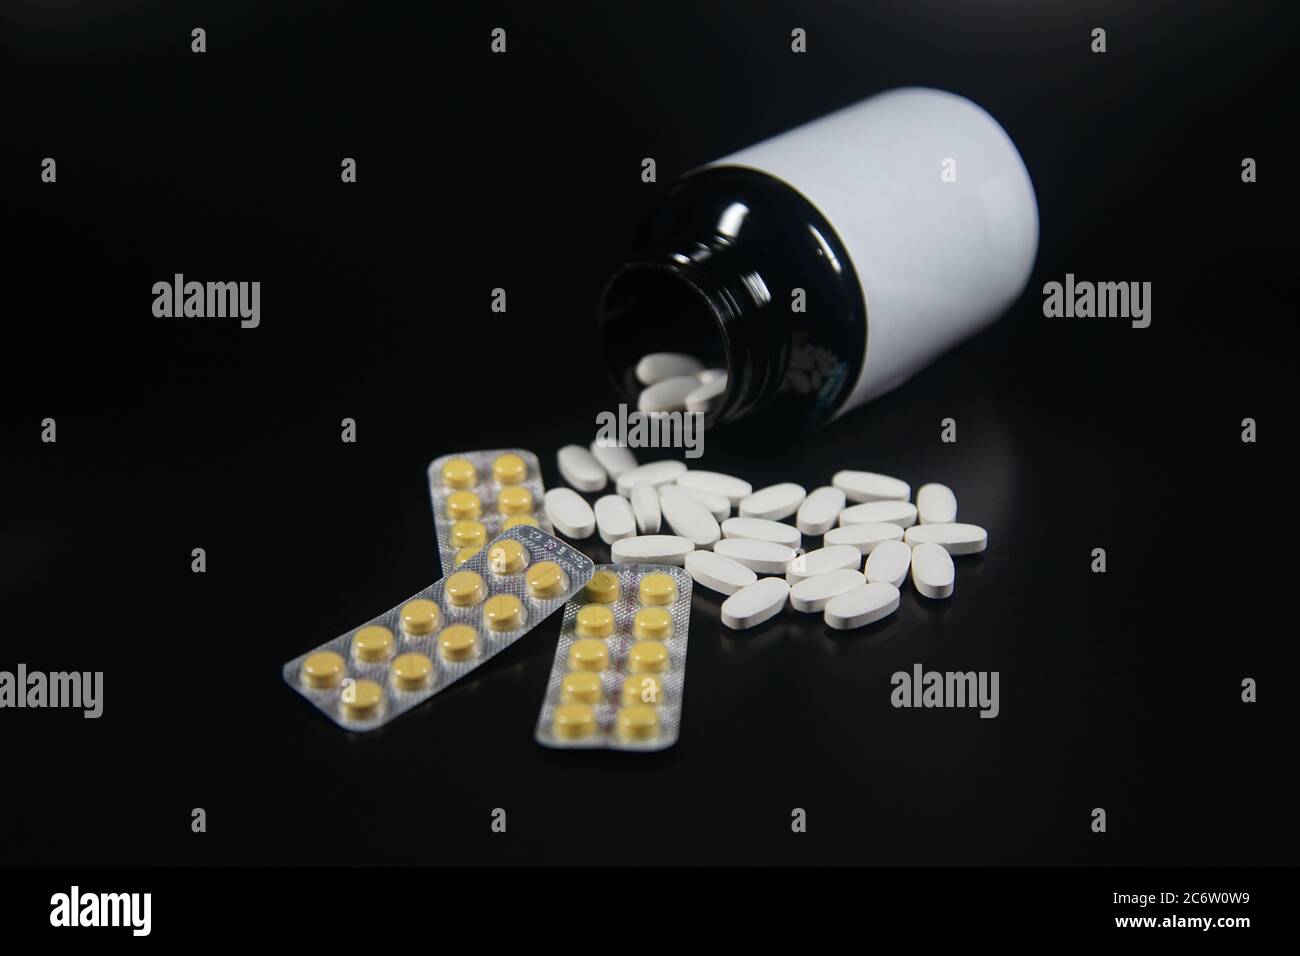 white medicine tablets with black bottle Stock Photo